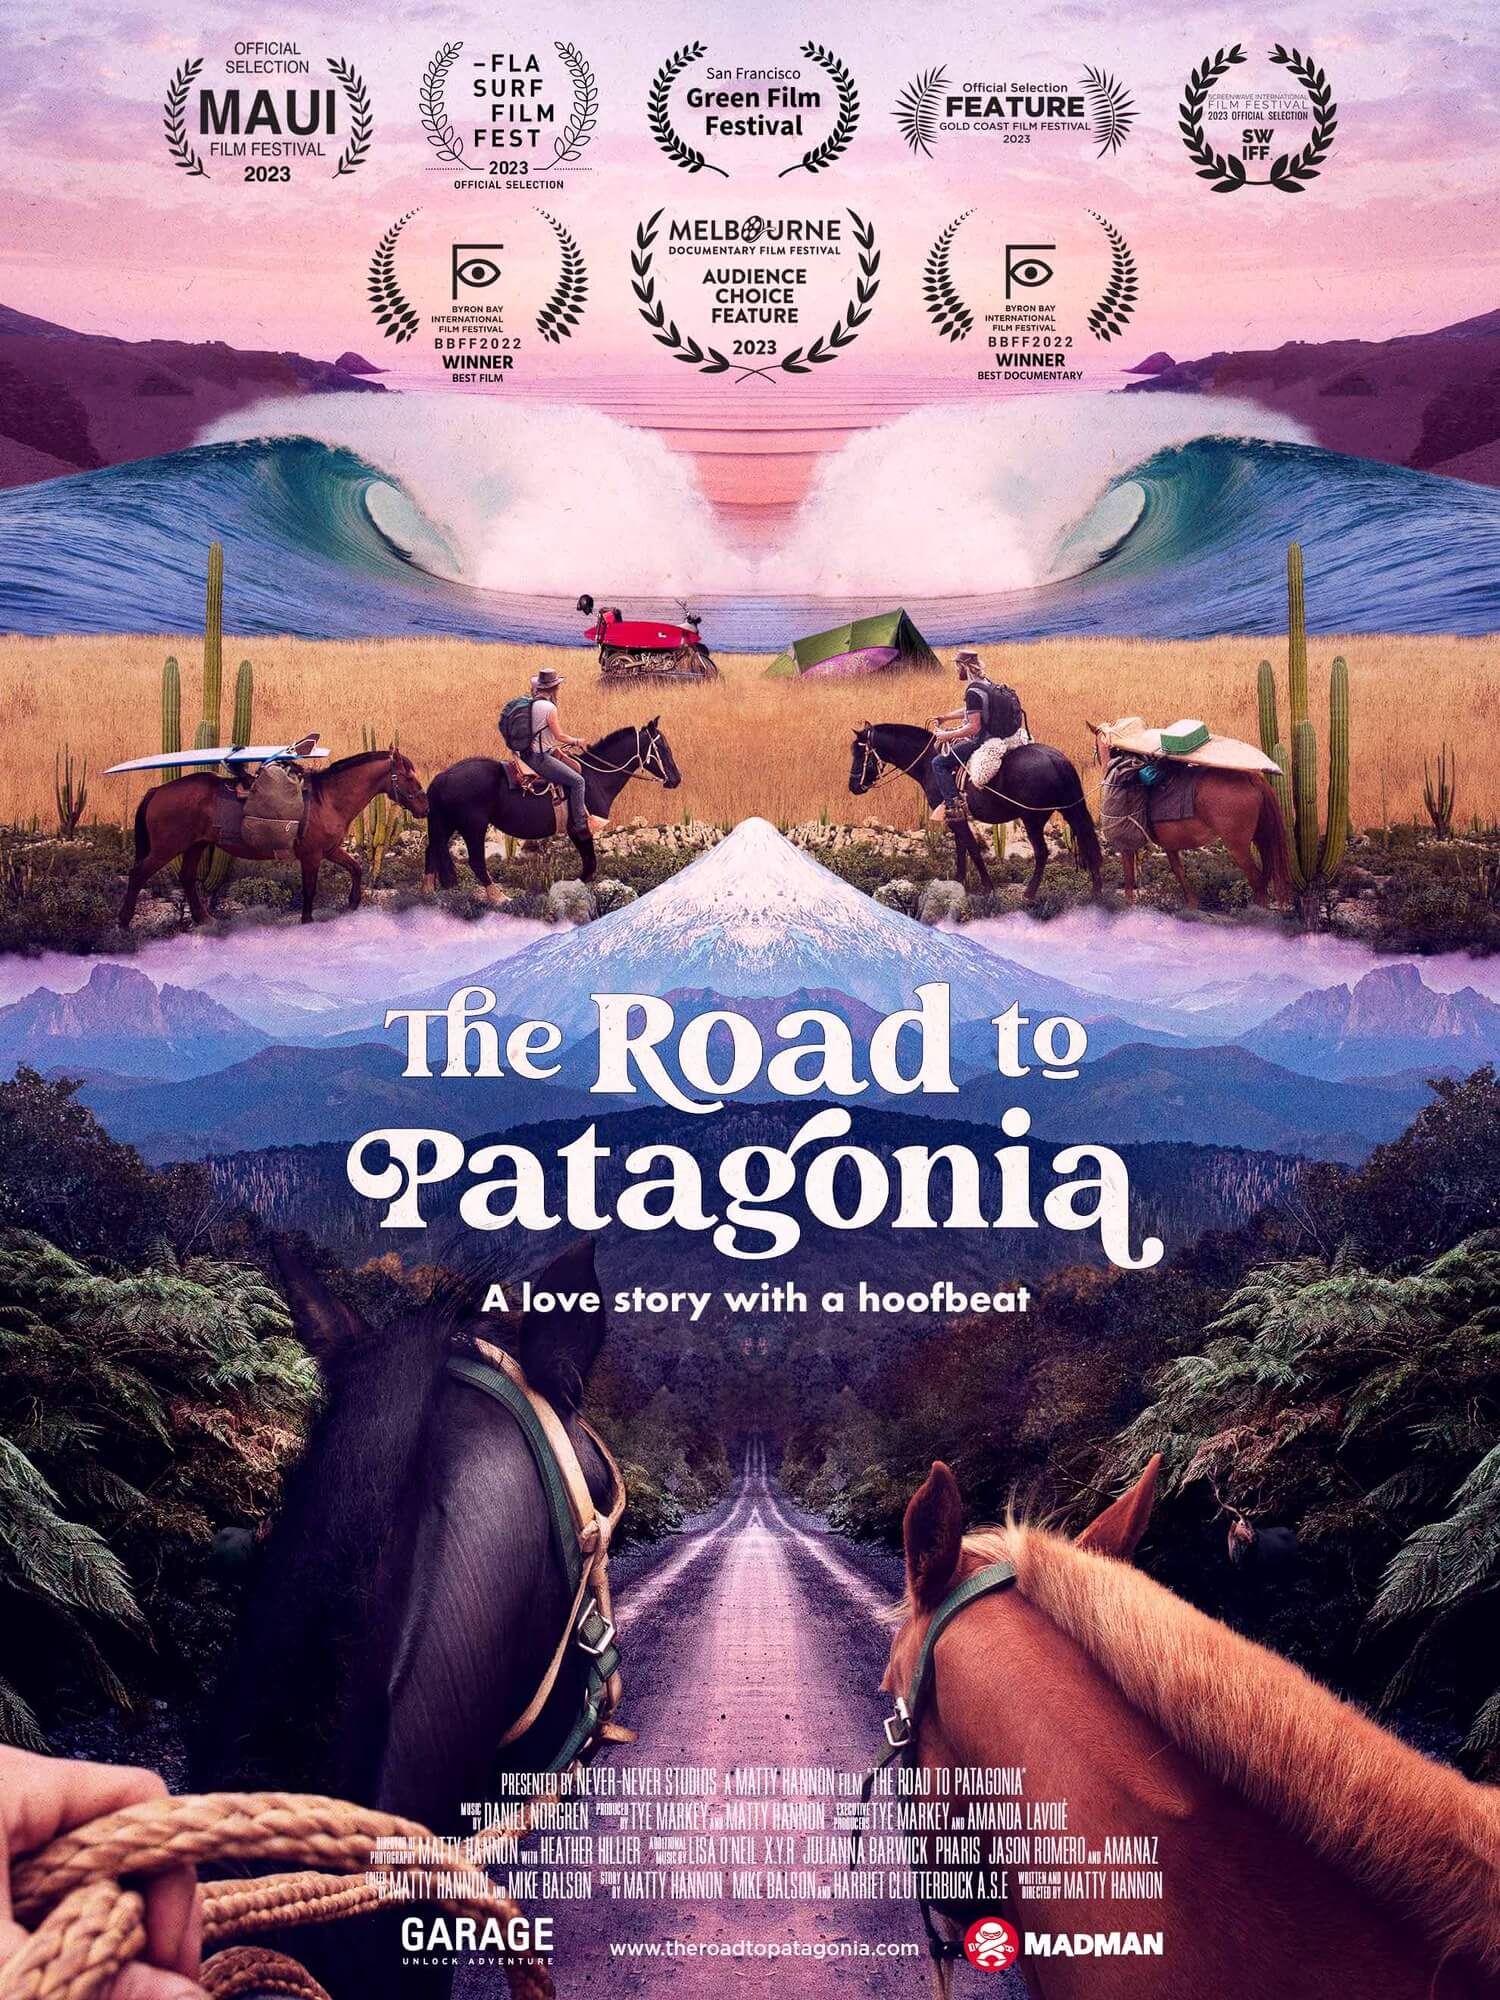 The Road to Patagonia (movie review)